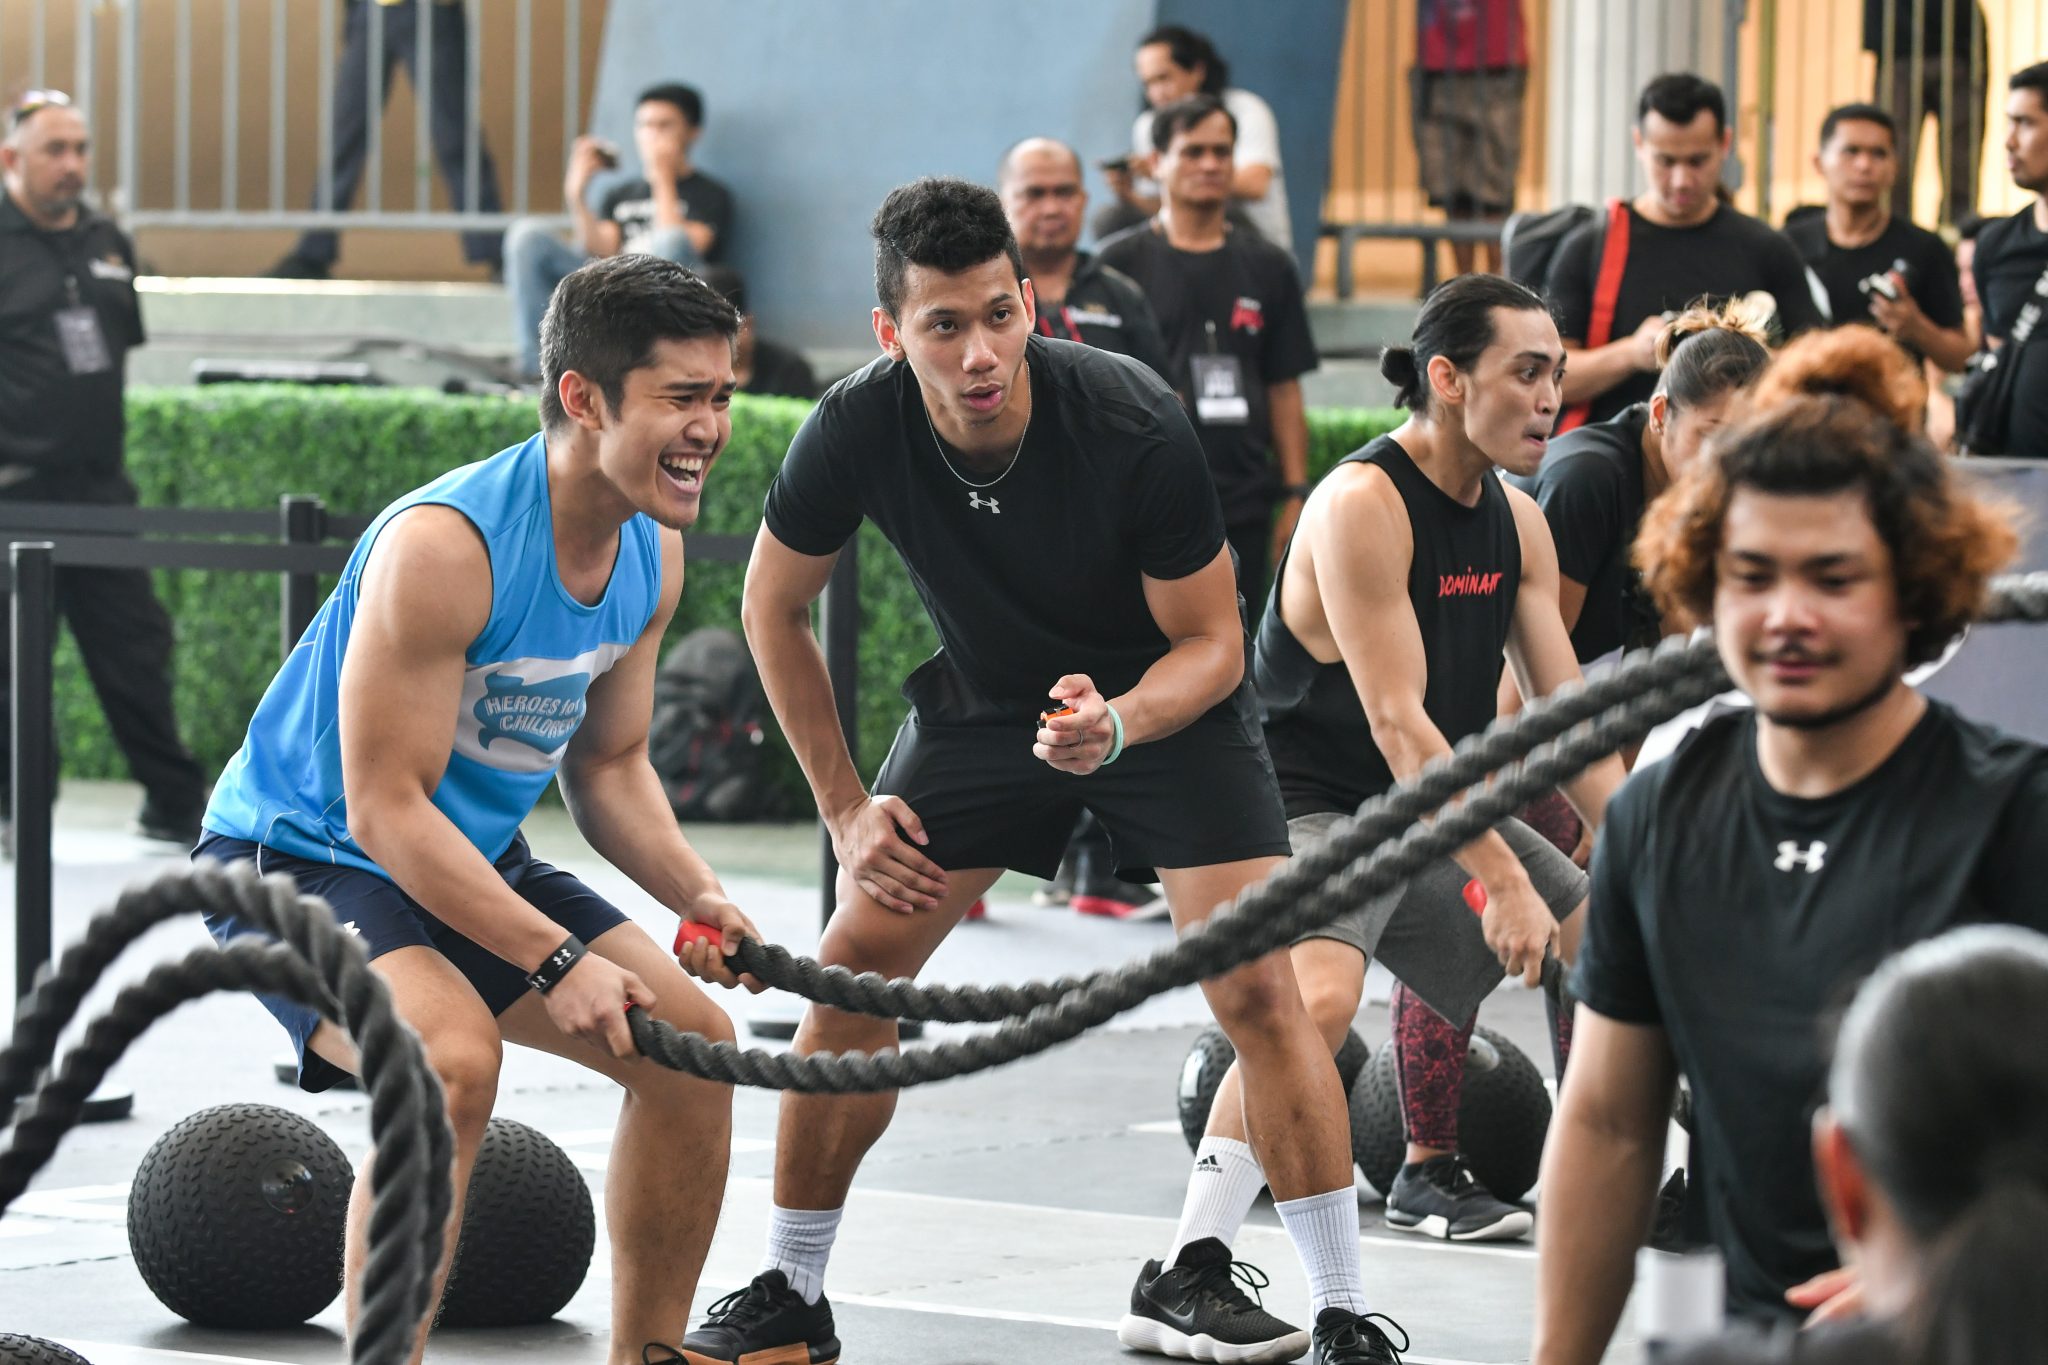 The Under Armour Test of Will challenge gives participants a chance to literally test their strength and will through a series of exercises